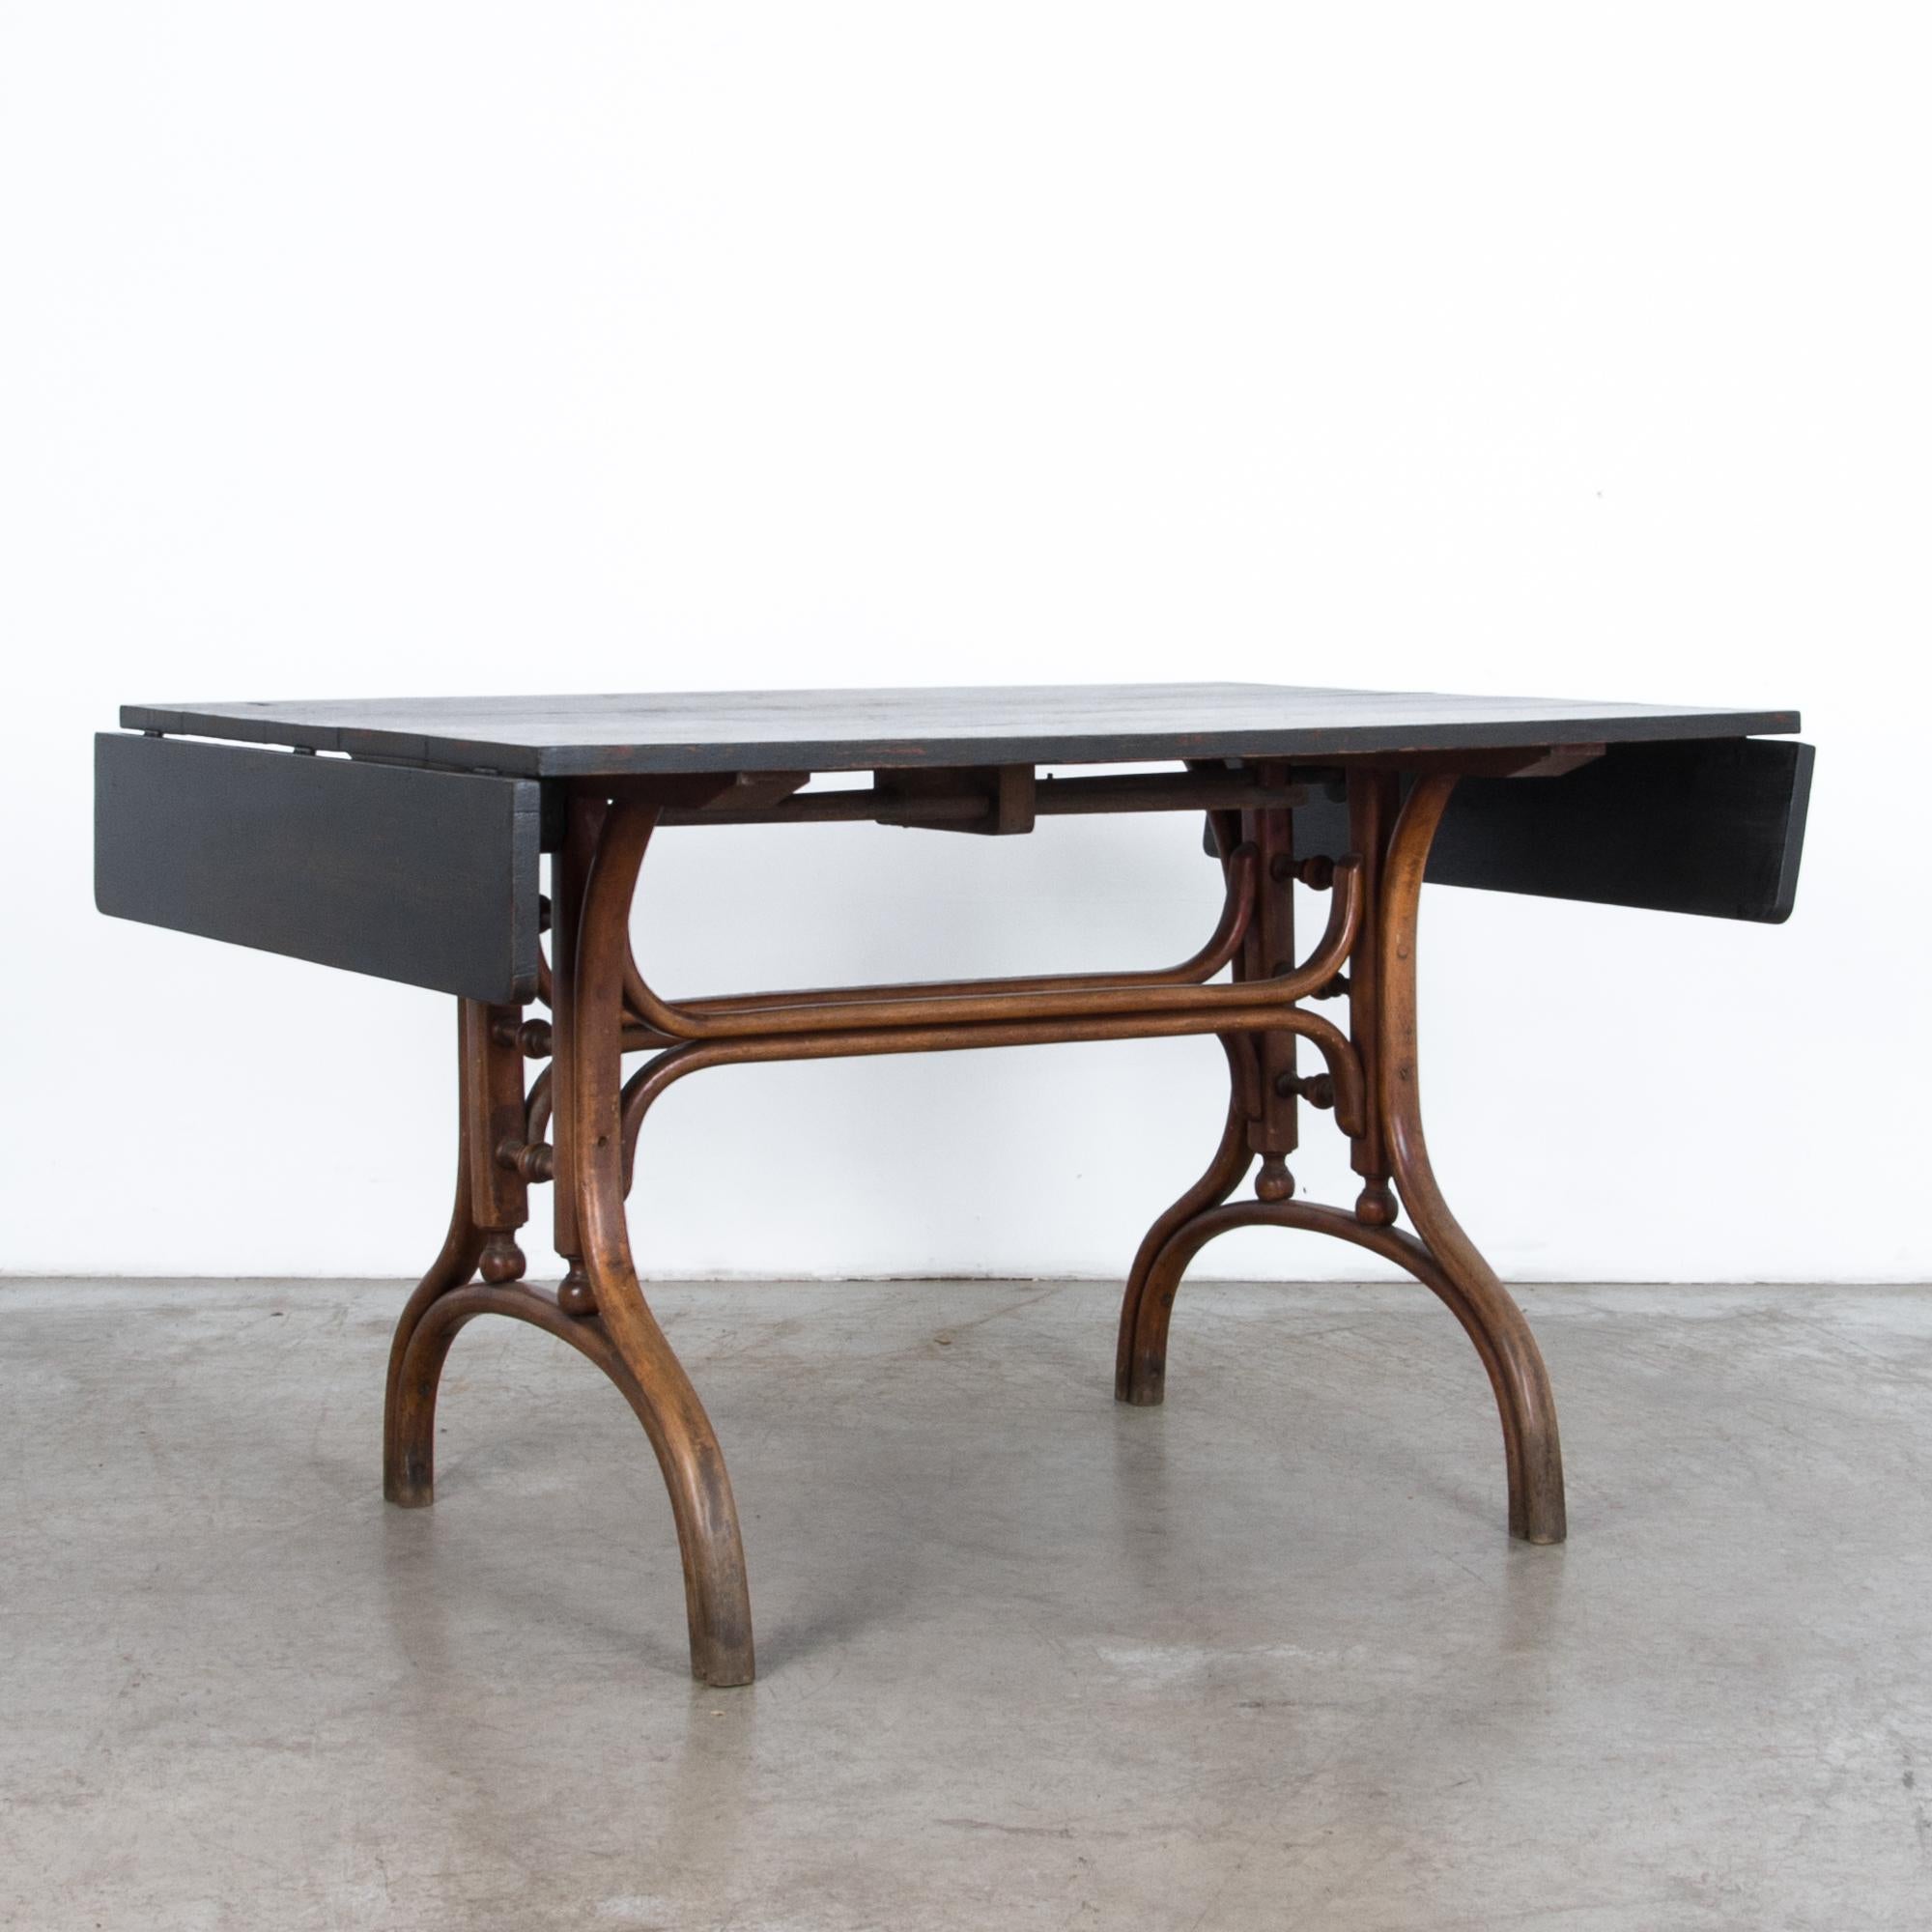 Early 20th Century Bent Beech Drop-Leaf Table